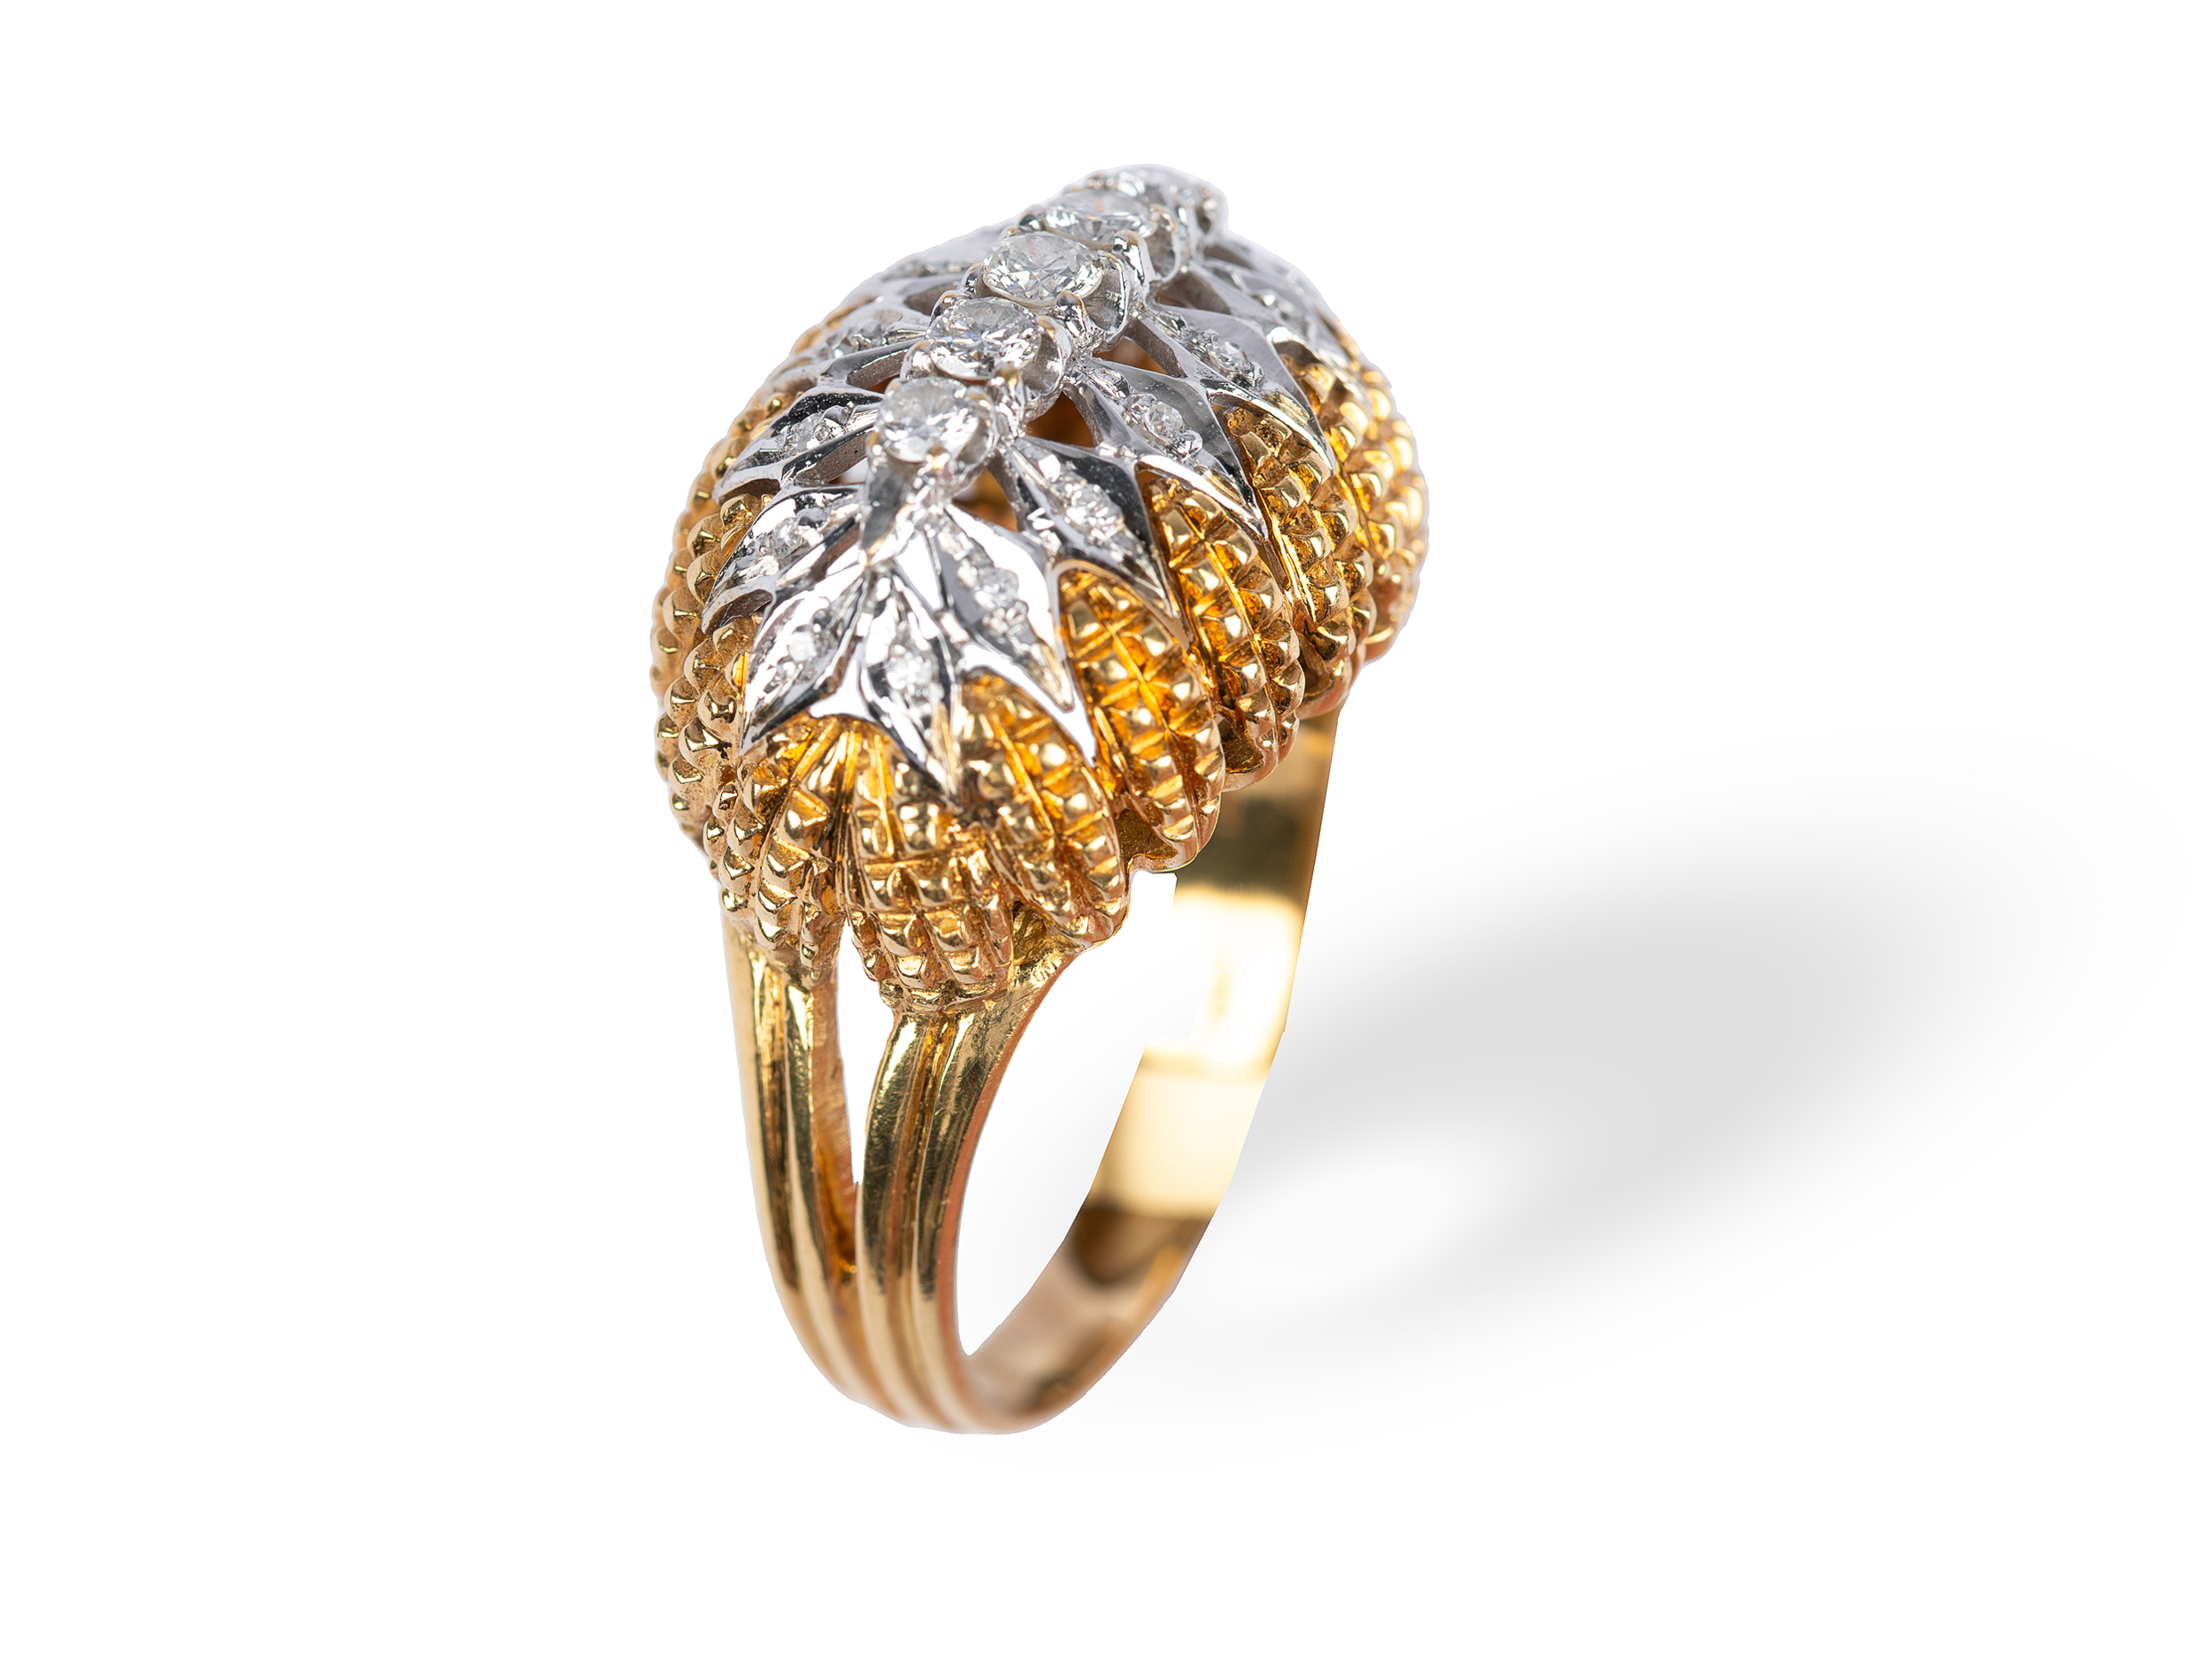 Cocktail ring, 18kt yellow gold hallmarked, set in white gold, Adorned with 5 diamonds - Image 2 of 2